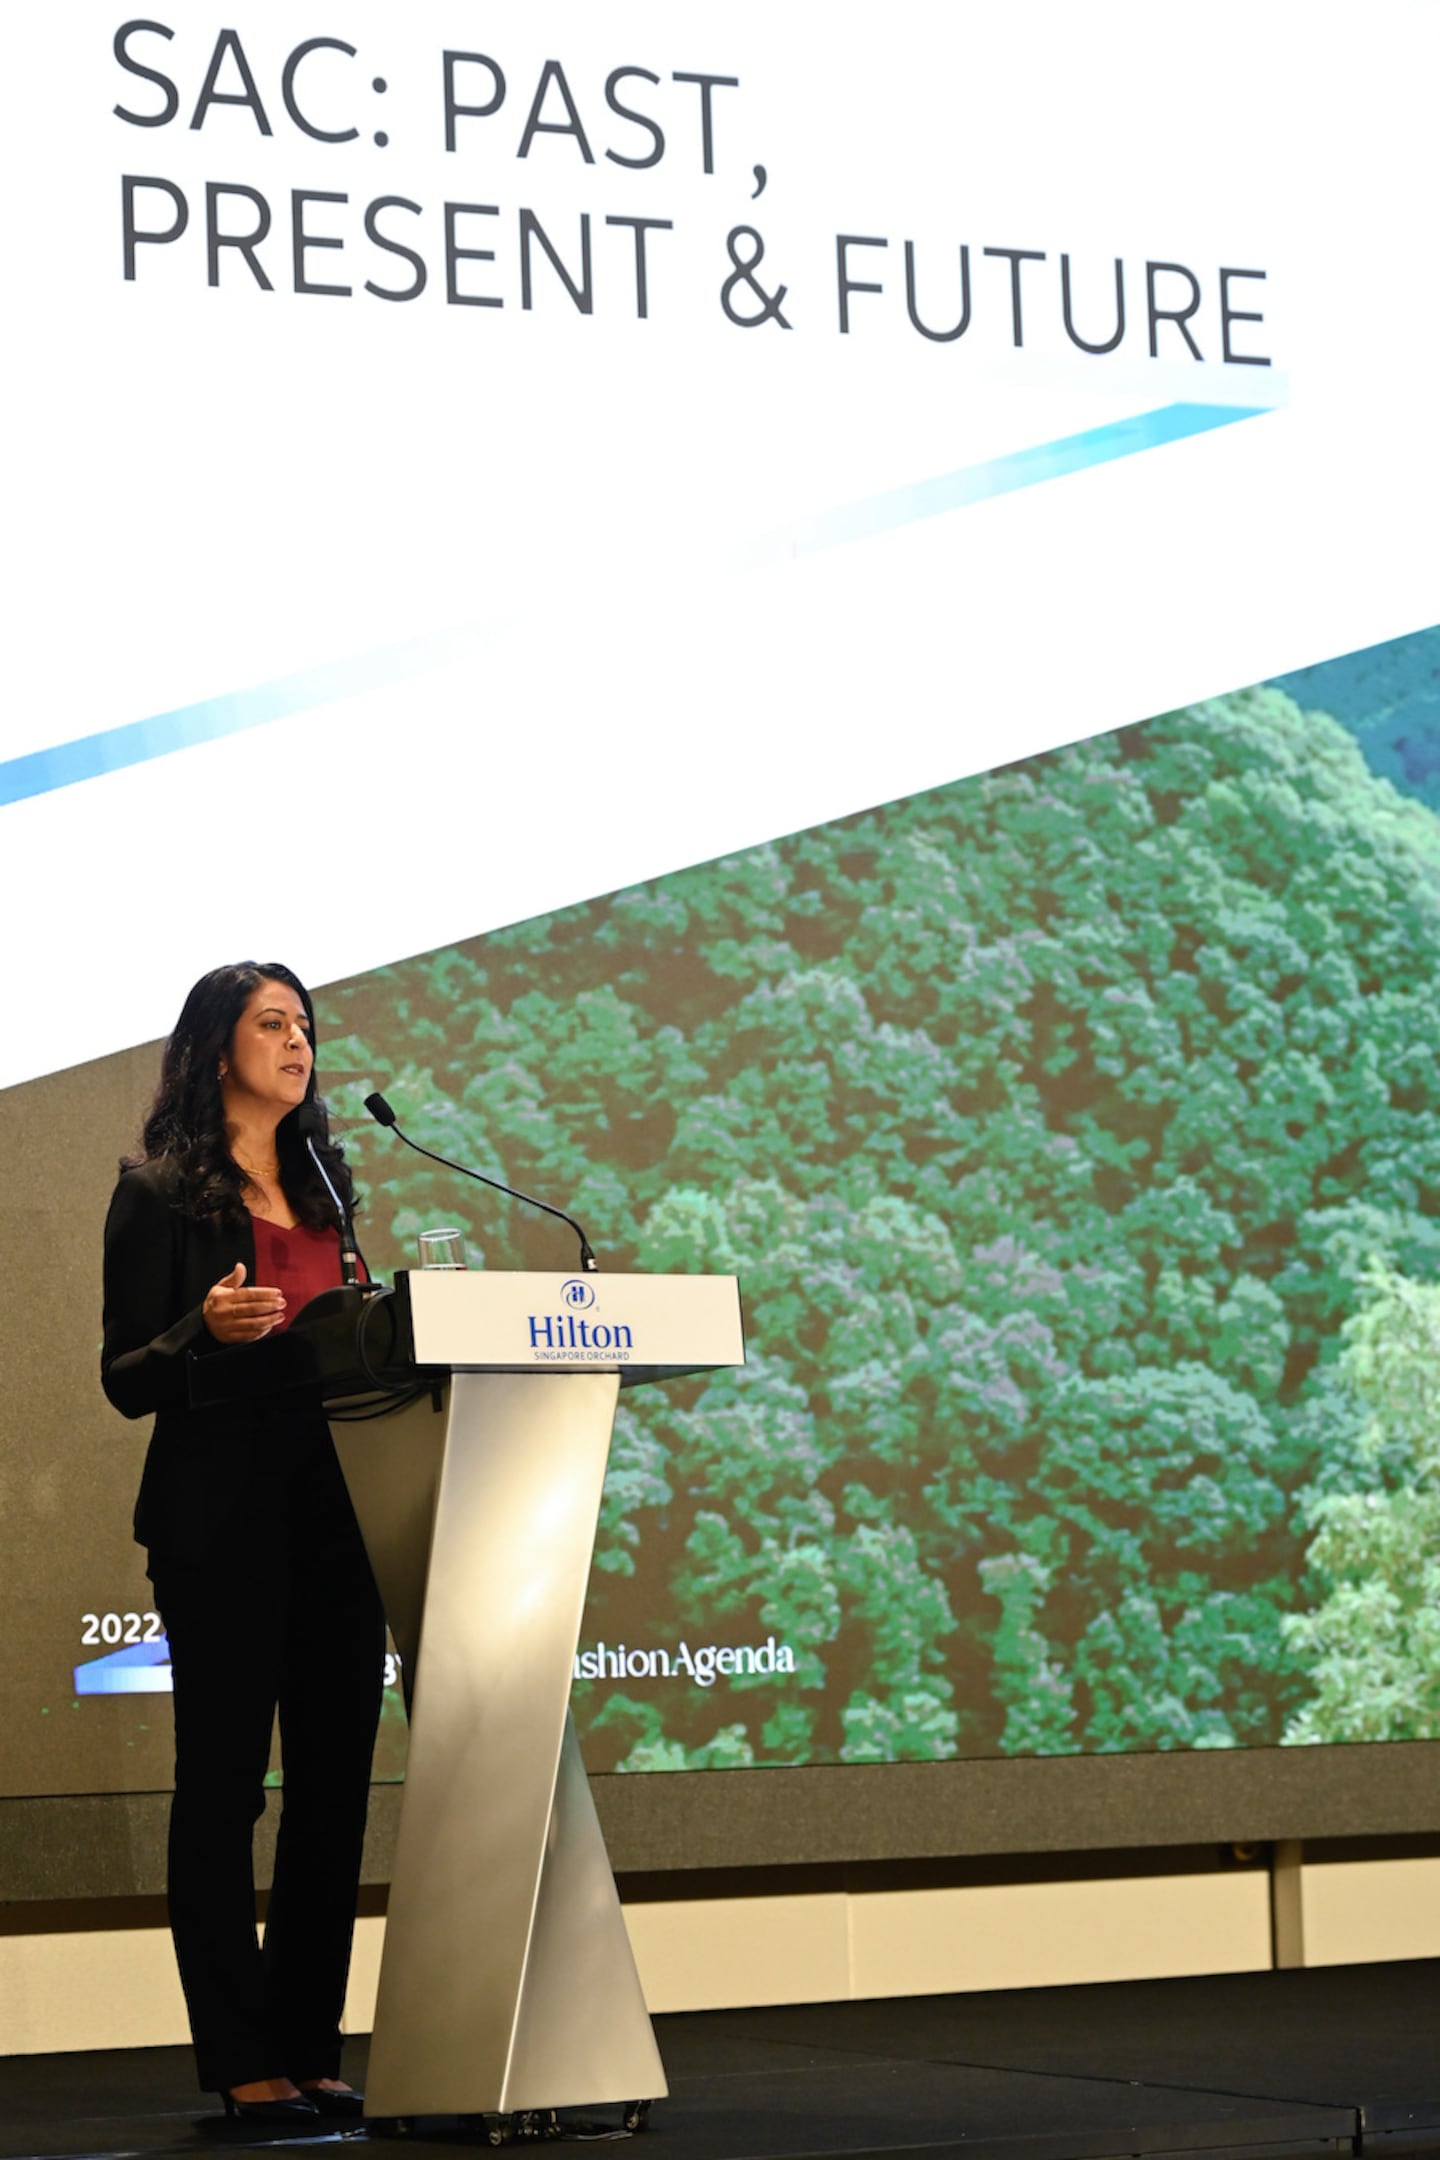 Former Sustainable Apparel Coalition CEO Amina Razvi speaks at the organisation's annual meeting in Singapore in 2022.